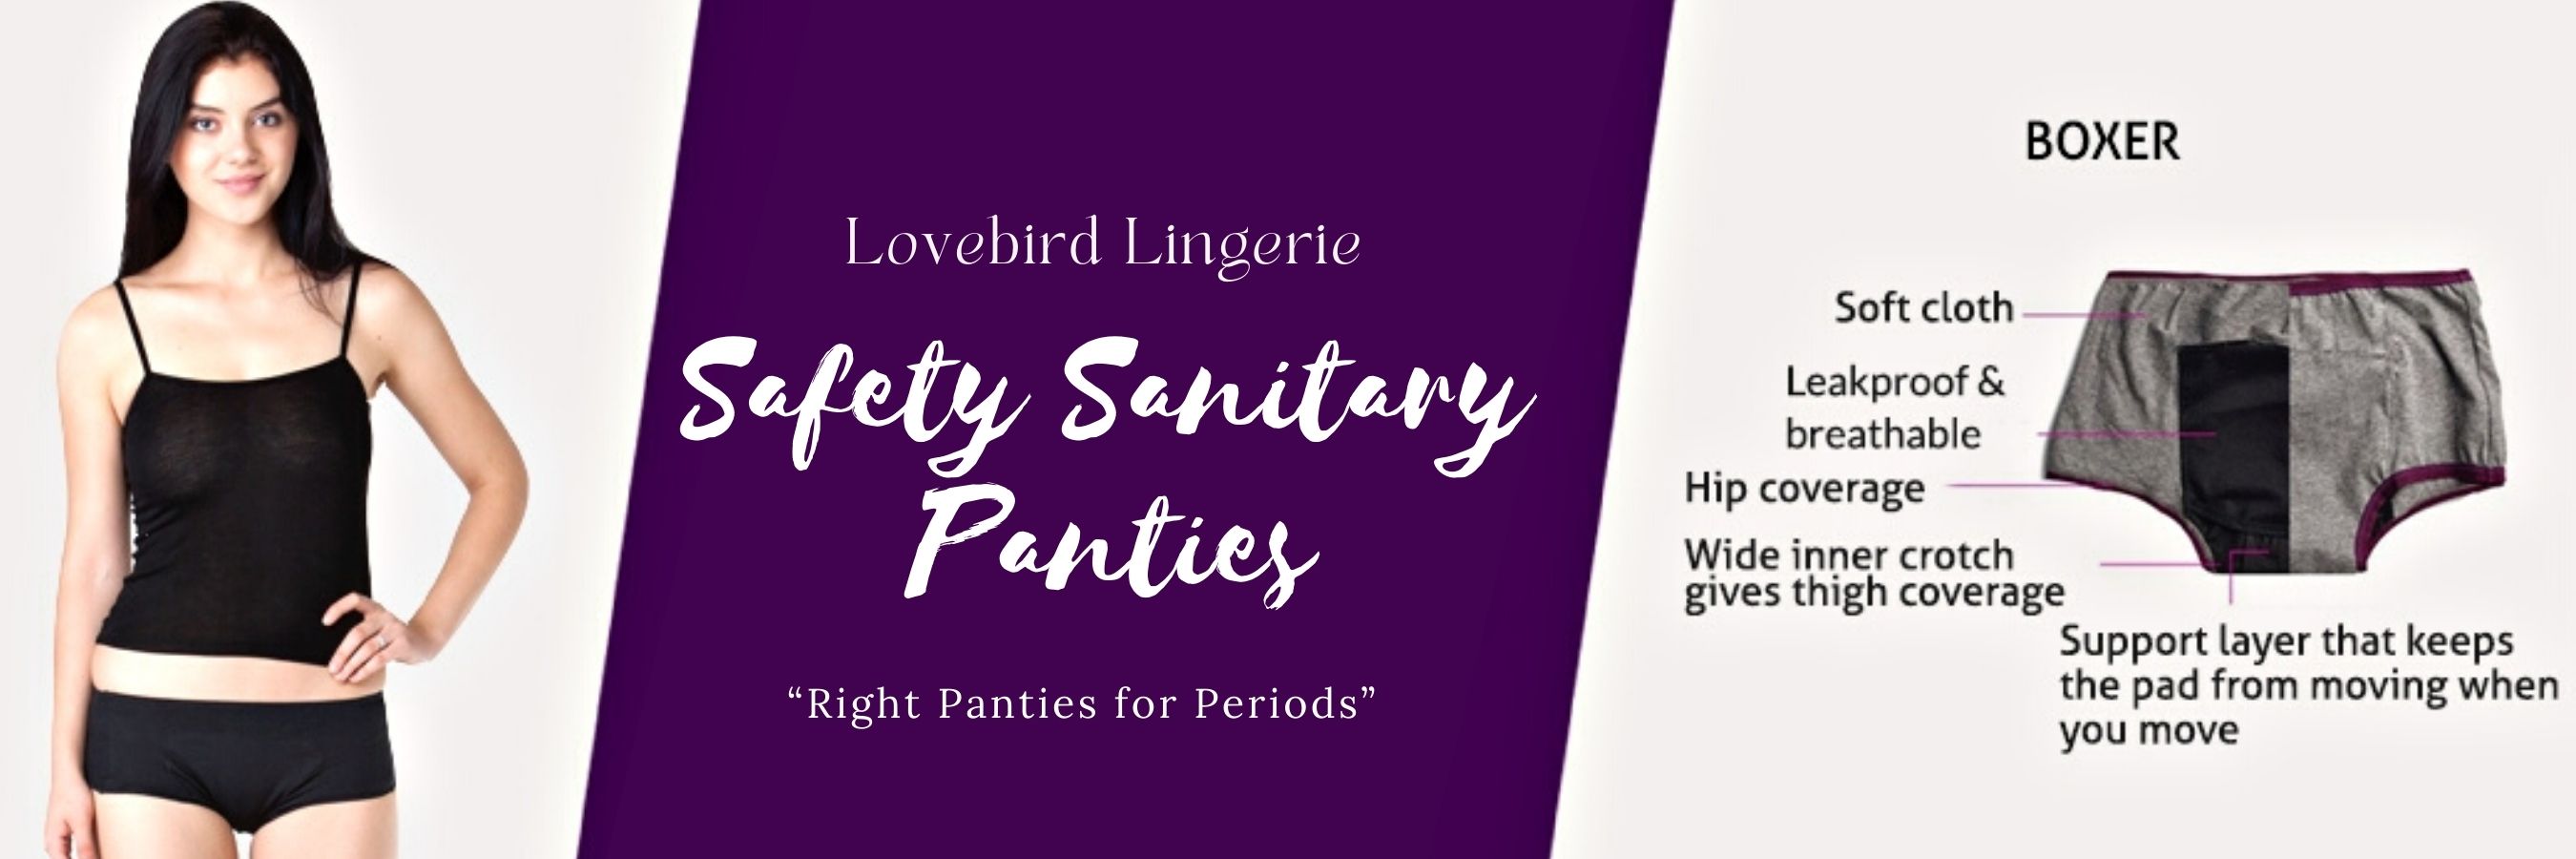 Safety Sanitary Panty are over banner lovebird